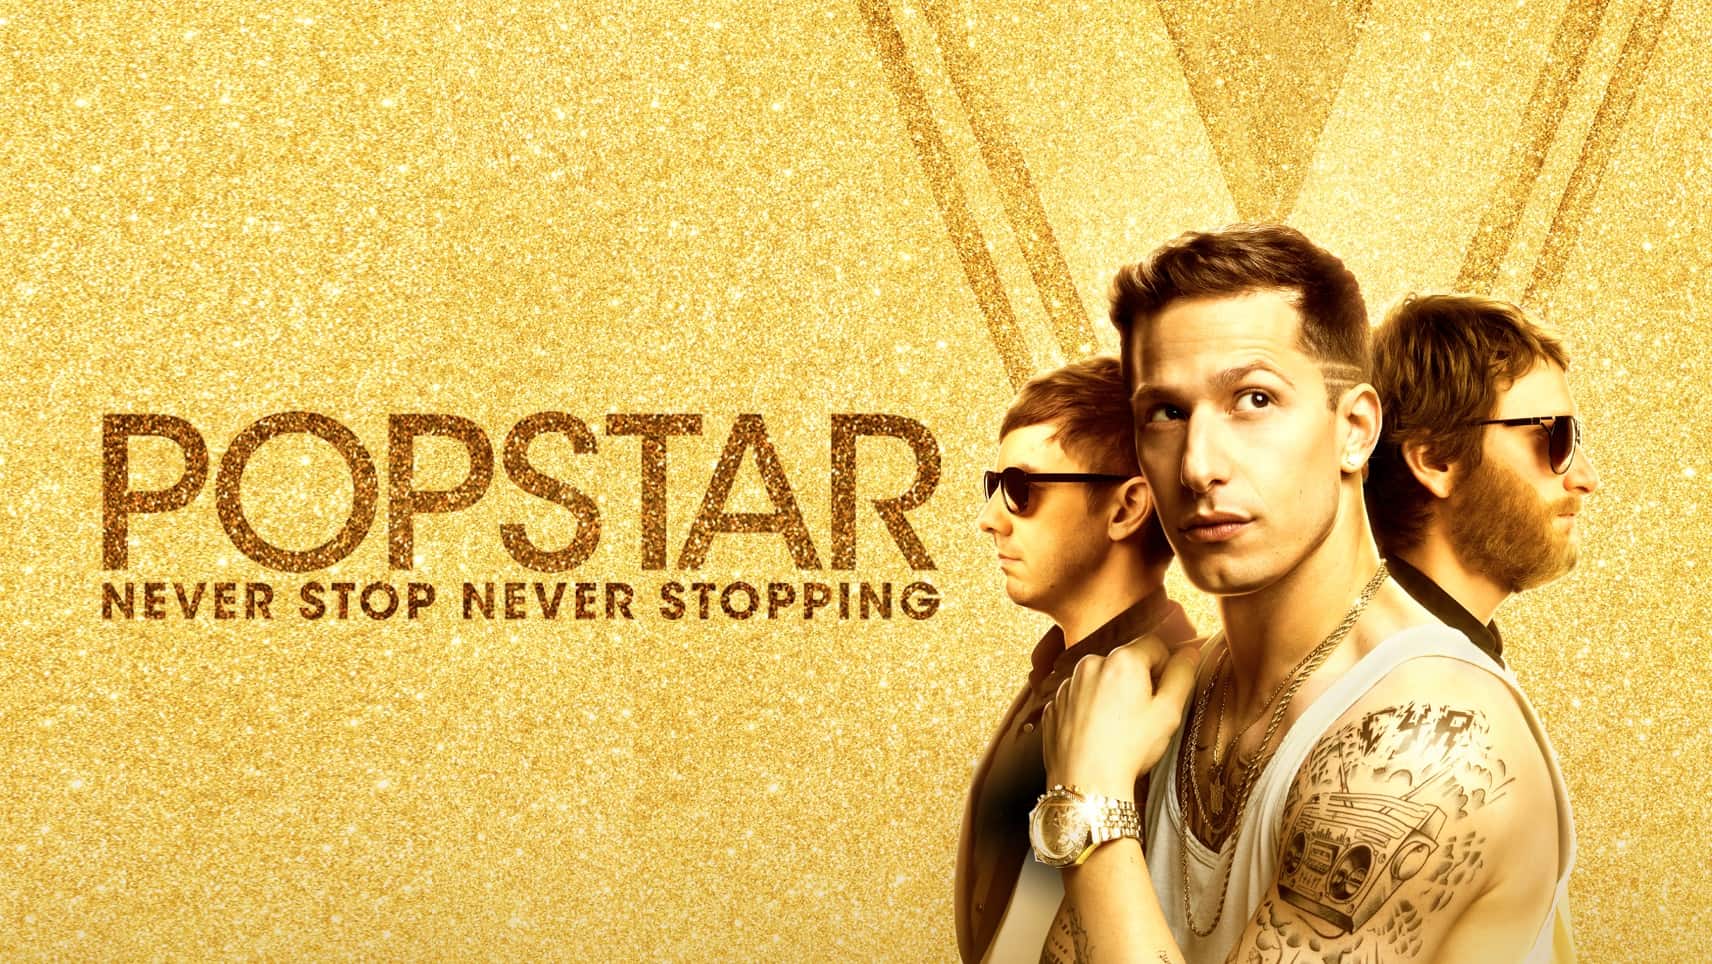 45-facts-about-the-movie-popstar-never-stop-never-stopping